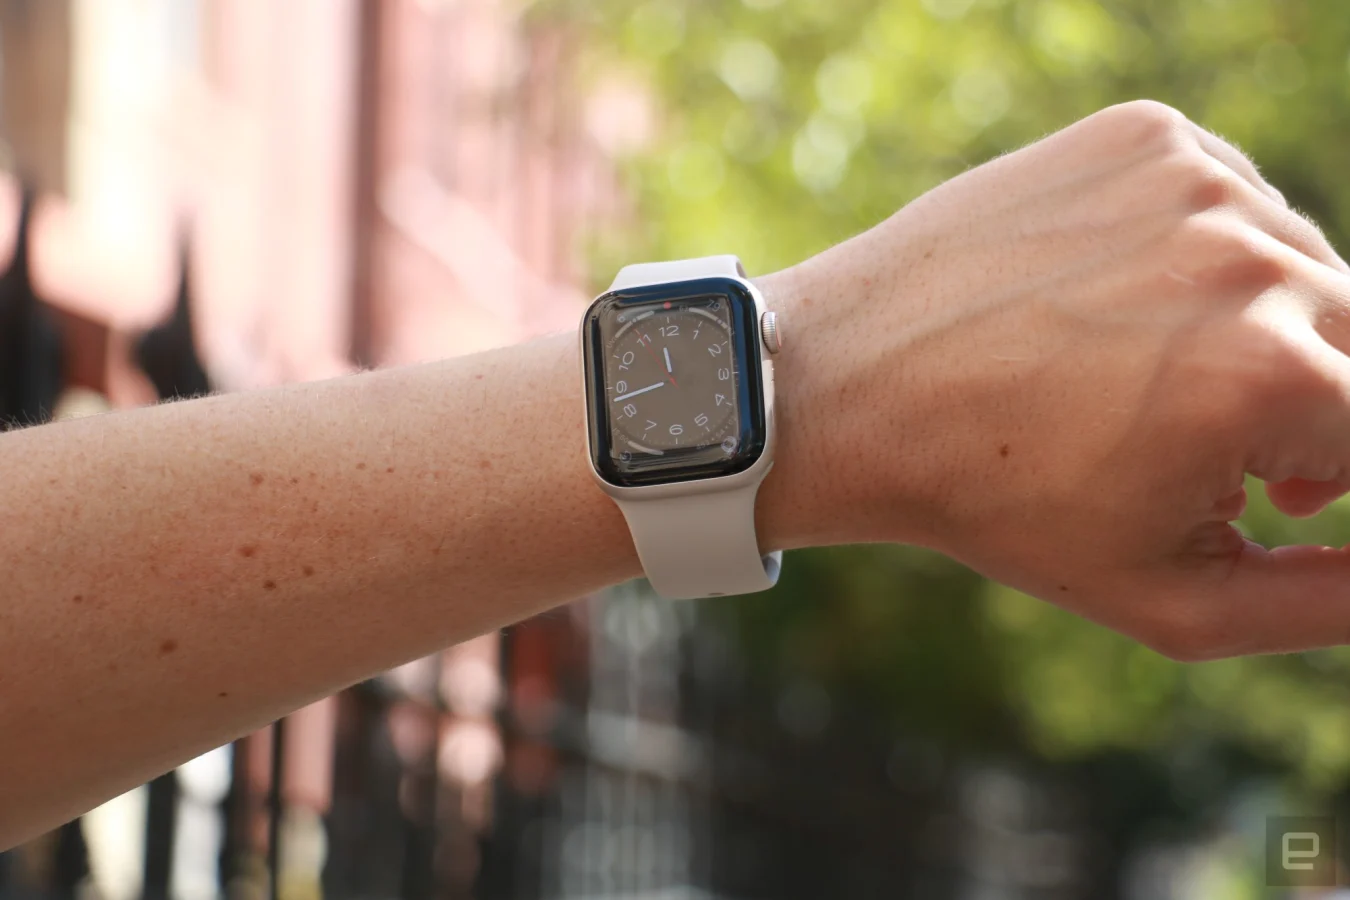 Apple Watch SE (2022) on the wrist of a person held up in front of a red building and a tree.